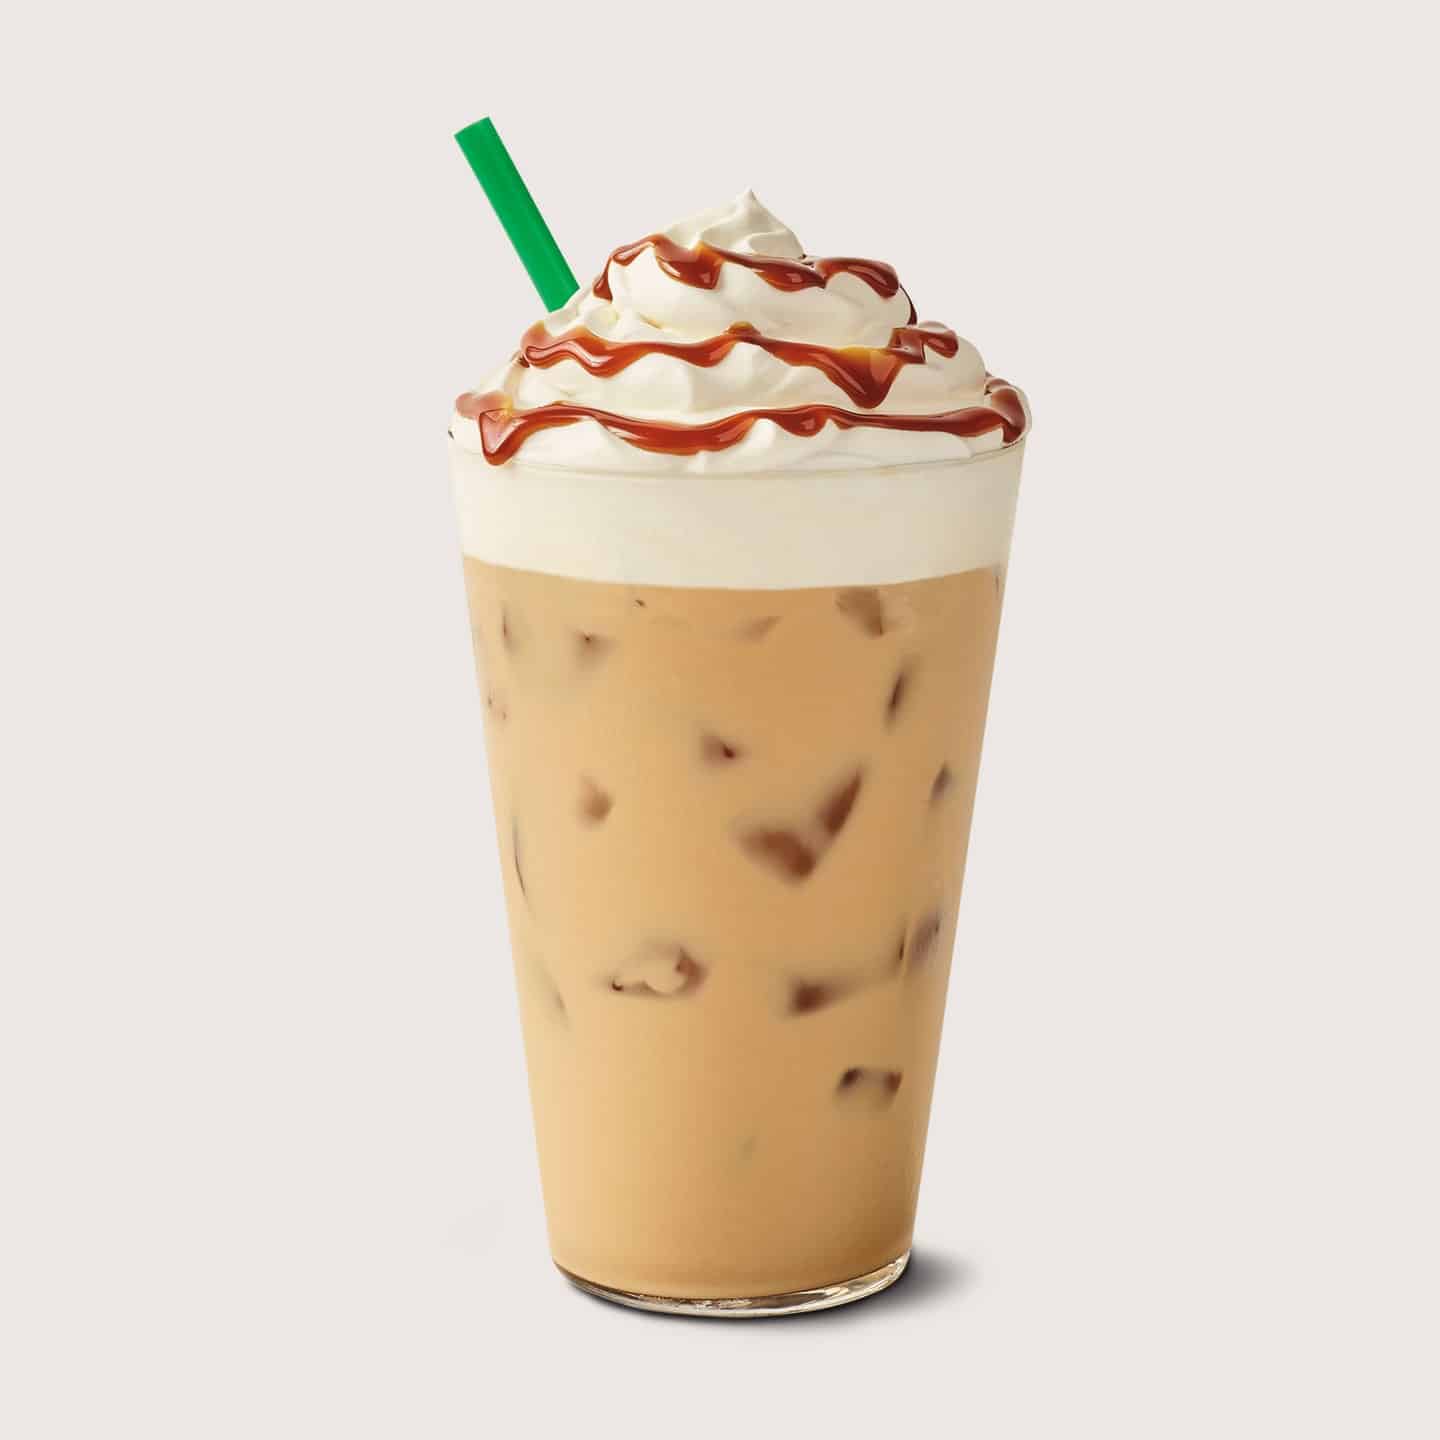 how to make a iced caramel latte